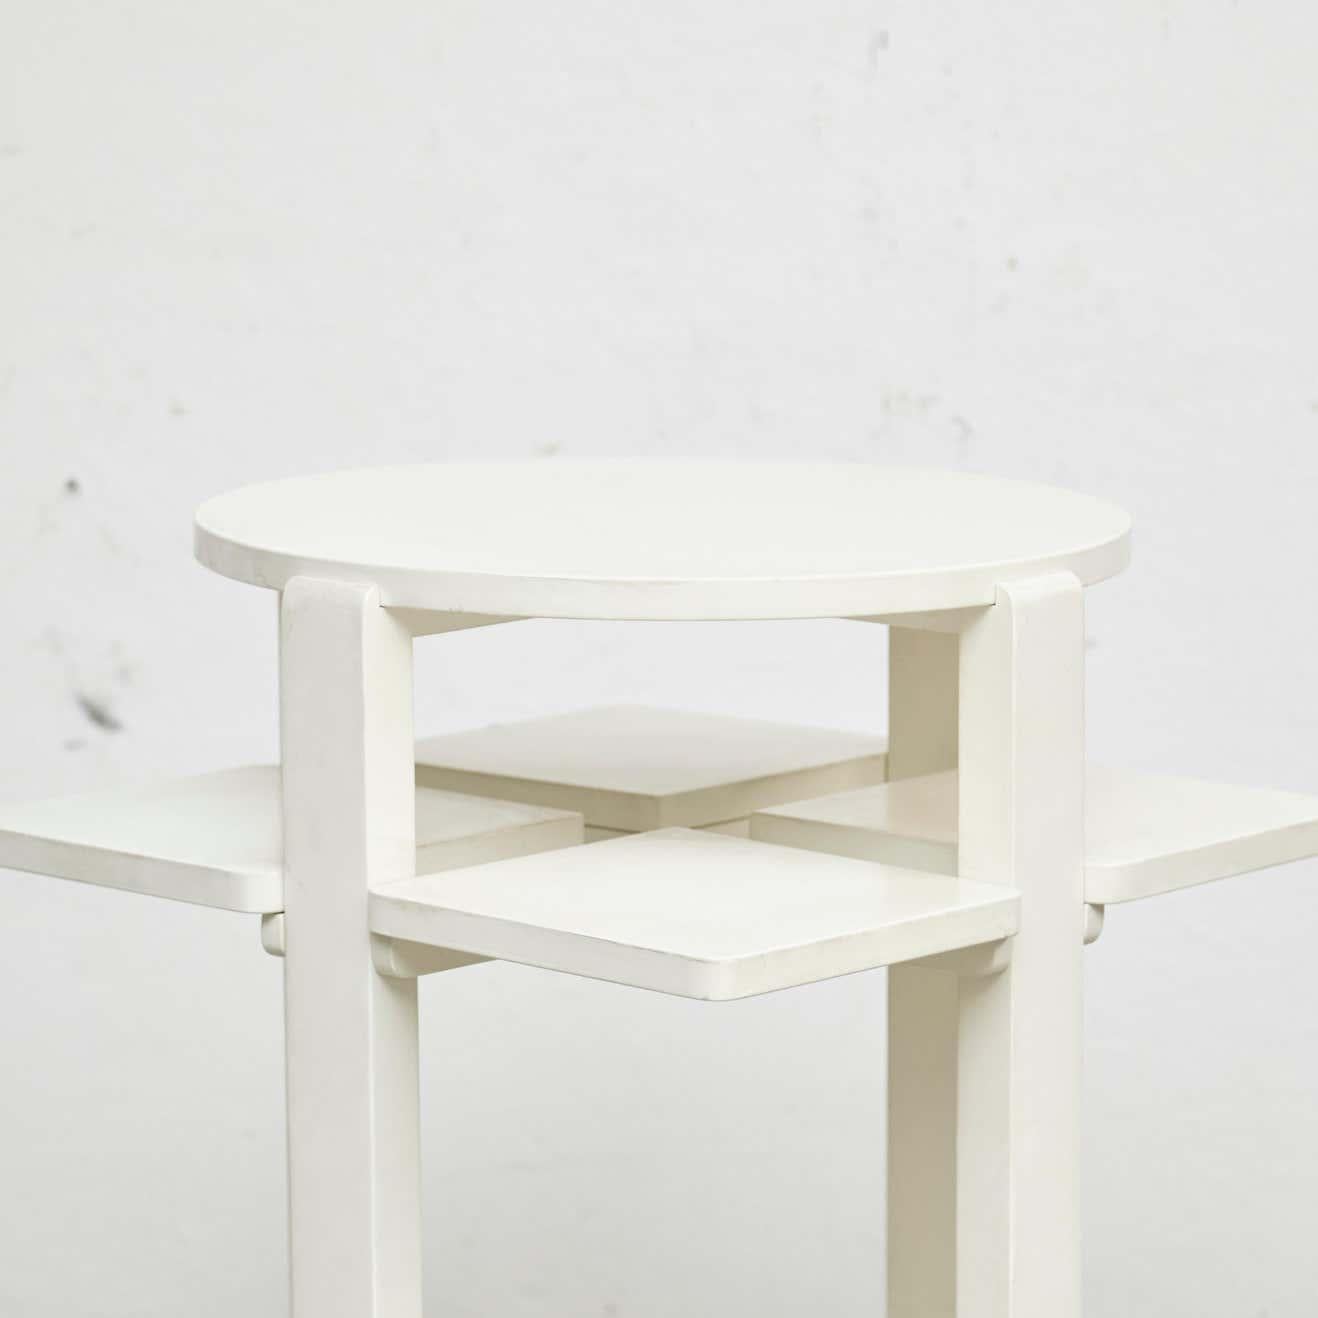 Wood Charles Rennie Mackintosh White Lacquered Domino Side Table, circa 1970